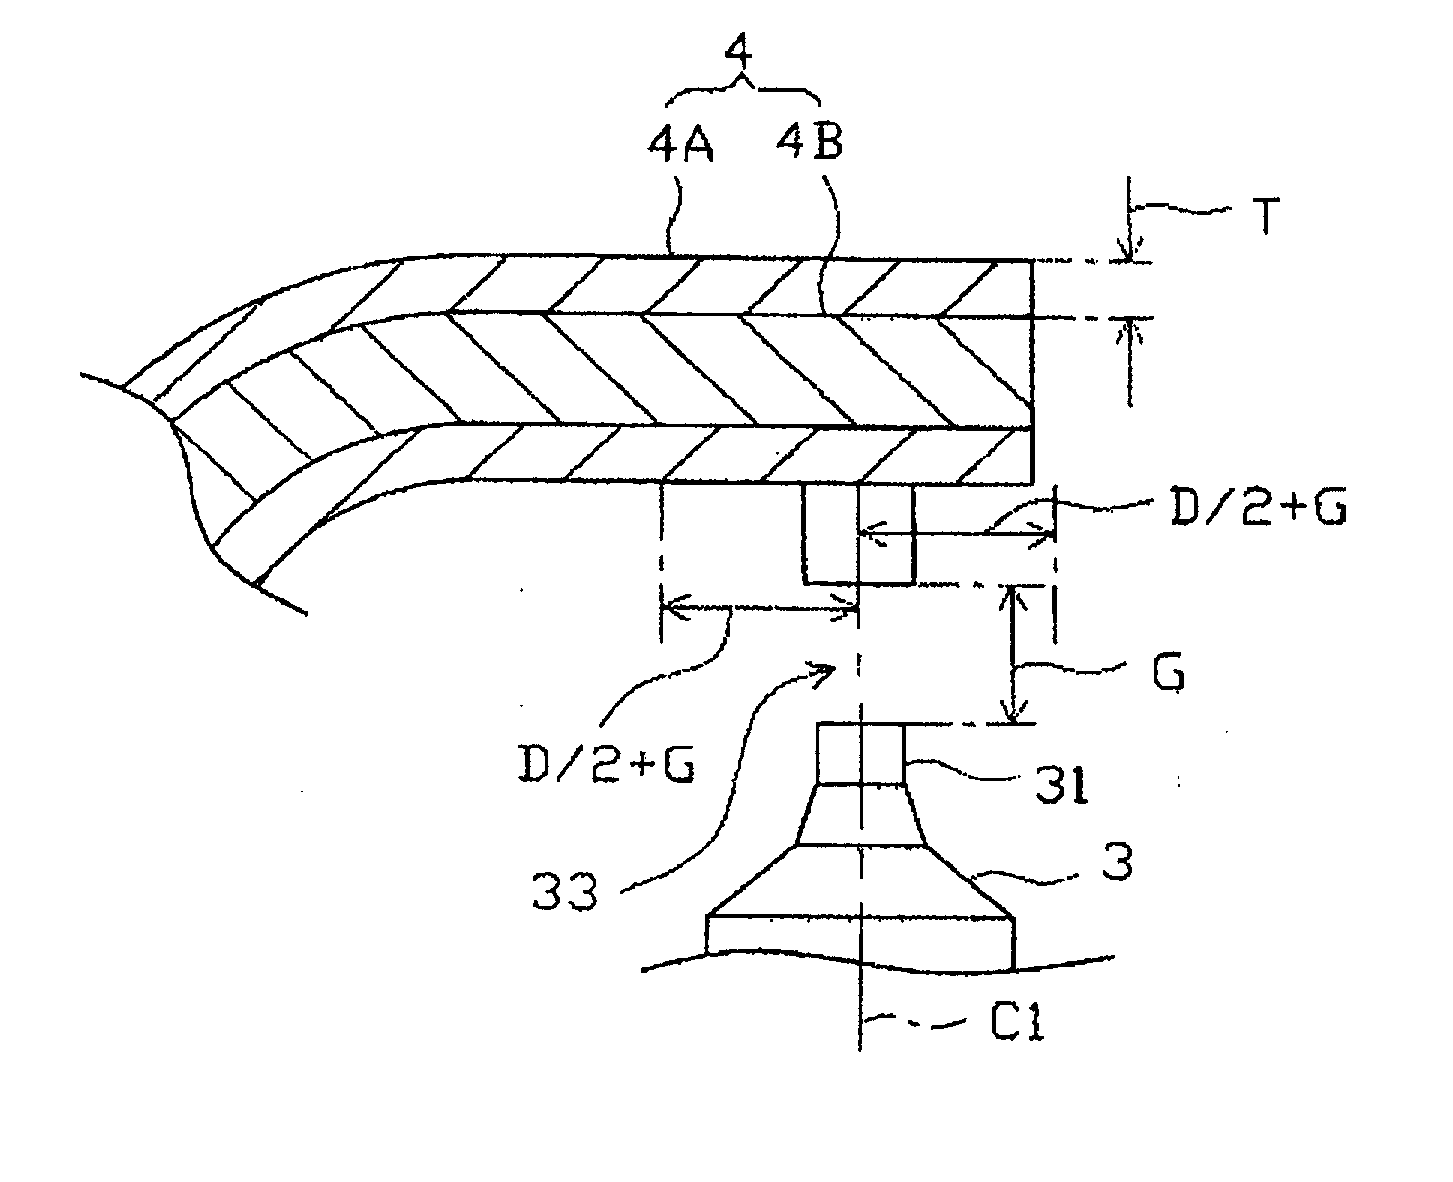 Spark plug for use in an internal-combustion engine